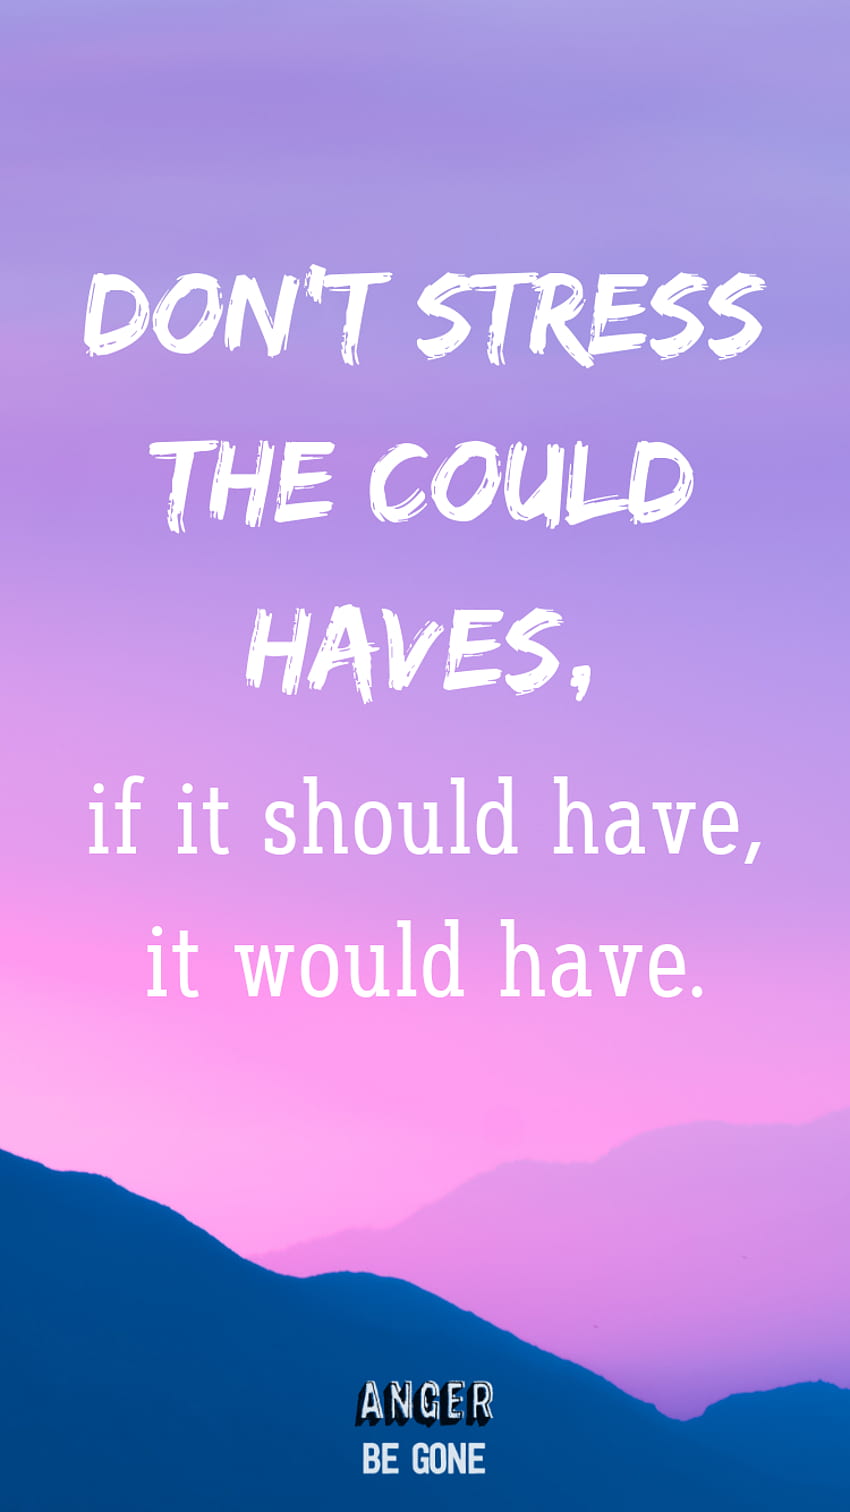 Worthy Stress Relief Quotes ideas. quotes, stress relief quotes, stress relief HD phone wallpaper